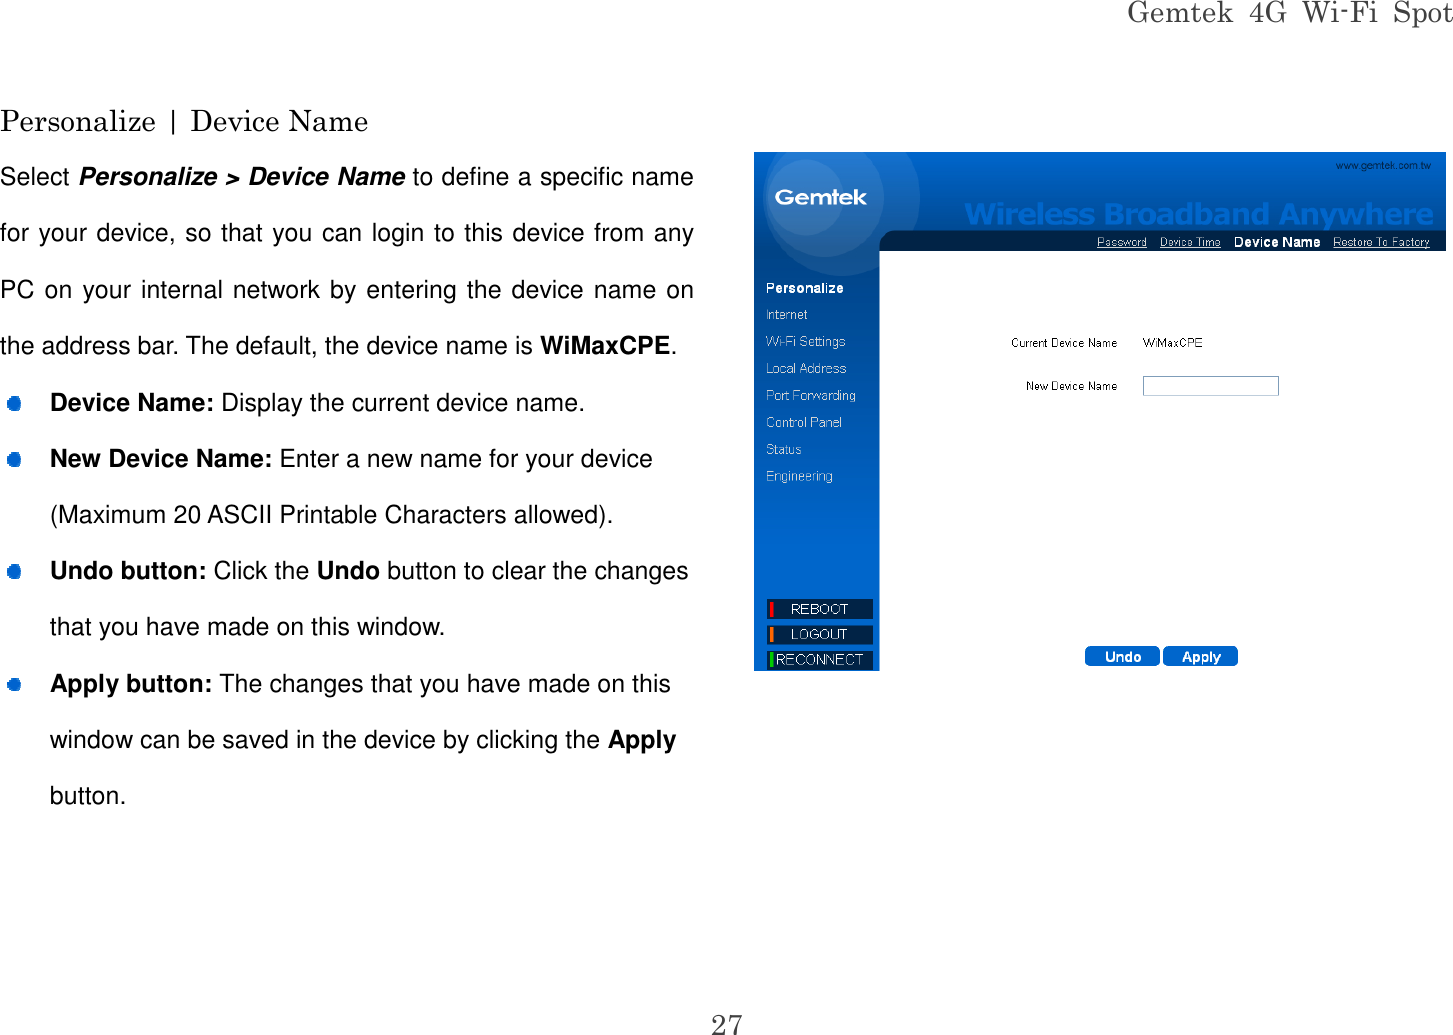 Gemtek  4G  Wi-Fi  Spot 27 Personalize | Device Name Select Personalize &gt; Device Name to define a specific name for your device, so that you can login to this device from any PC on your internal network by entering the device name on the address bar. The default, the device name is WiMaxCPE.  Device Name: Display the current device name.  New Device Name: Enter a new name for your device (Maximum 20 ASCII Printable Characters allowed).  Undo button: Click the Undo button to clear the changes that you have made on this window.  Apply button: The changes that you have made on this window can be saved in the device by clicking the Apply button.   